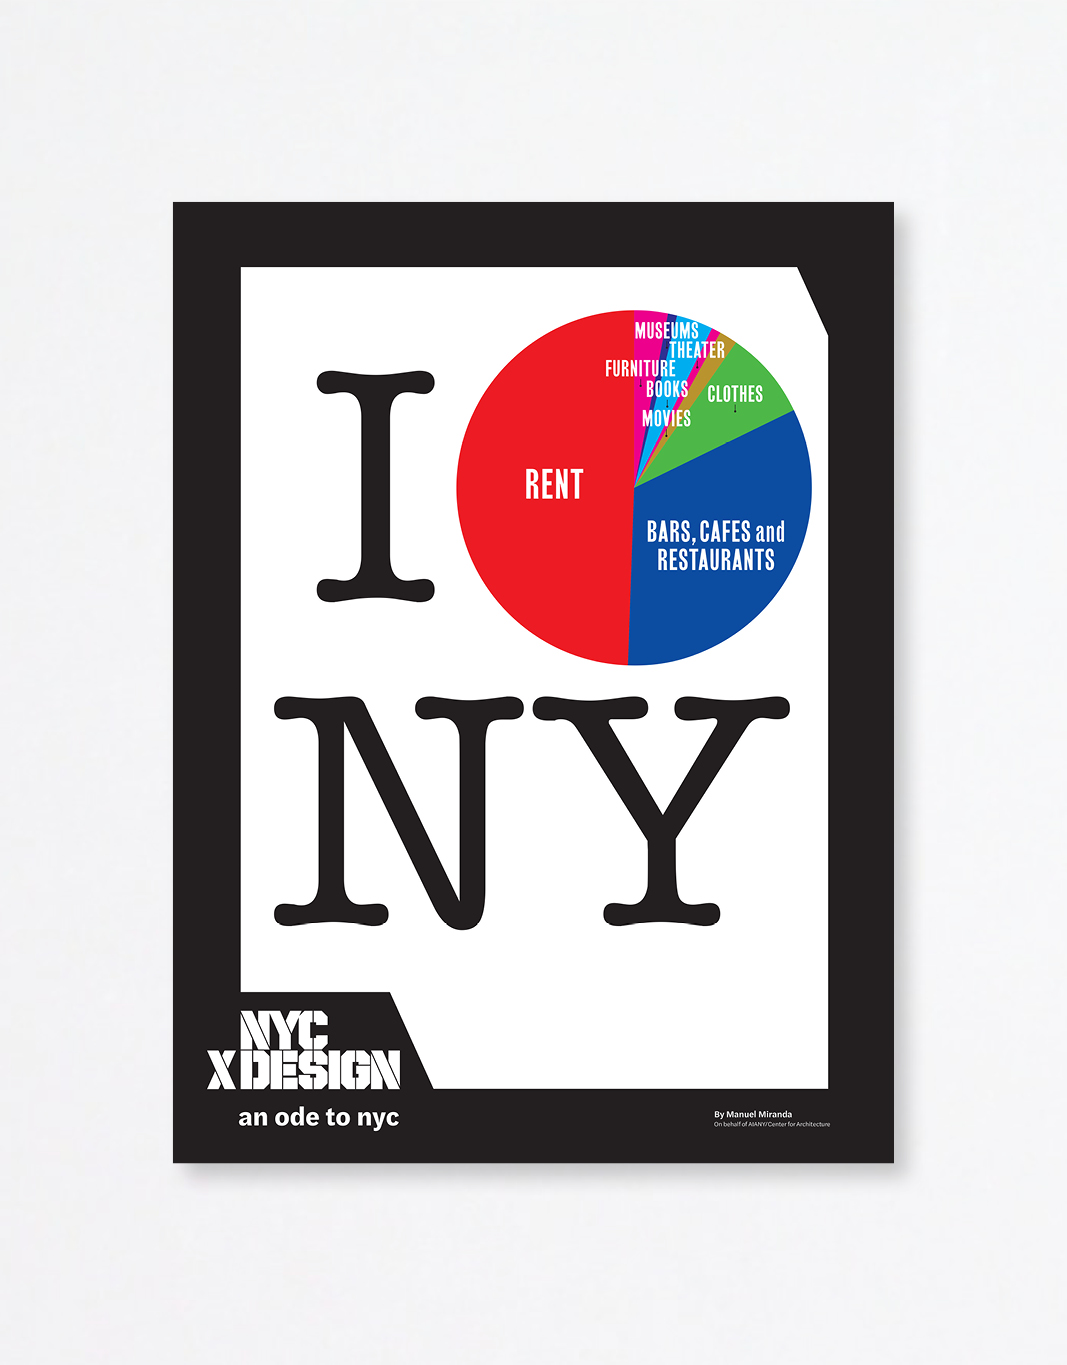 A poster mimicking I love NY poster. this poster shows circular graph instead of heart icon. The graph shows how New Yorkers spend their money.